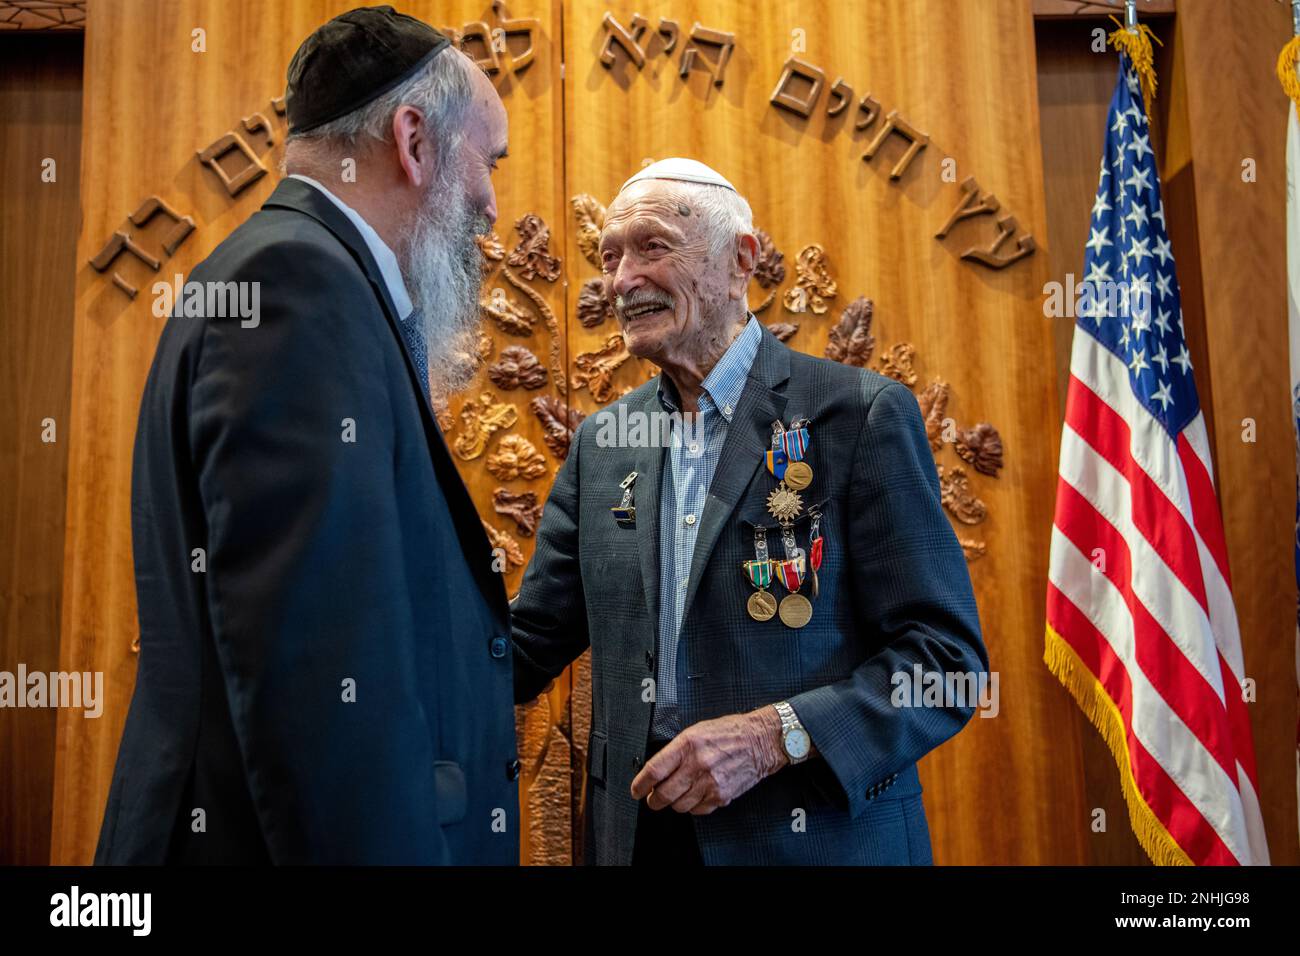 Rabbi Tuvia Teldon (left) congratulates his father, U.S. Army Air Corps 1st Lt. Gerald Teldon, retired, for his honorable service as a pilot on July 29, 2022, at the Chabad Center for Jewish Life and Learning, San Antonio, Texas. Teldon, born in Bronx, N.Y., in 1924, joined the military in 1944. He completed 62 missions during WWII and the Korean War. Lt. Col. Andrew Stein, 502nd Operations Support Squadron commander, was the presiding officers. The awards presented to Teldon are as follows: the Air Medal; American Campaign Medal; European – African – Middle Eastern Campaign Medal; World War I Stock Photo